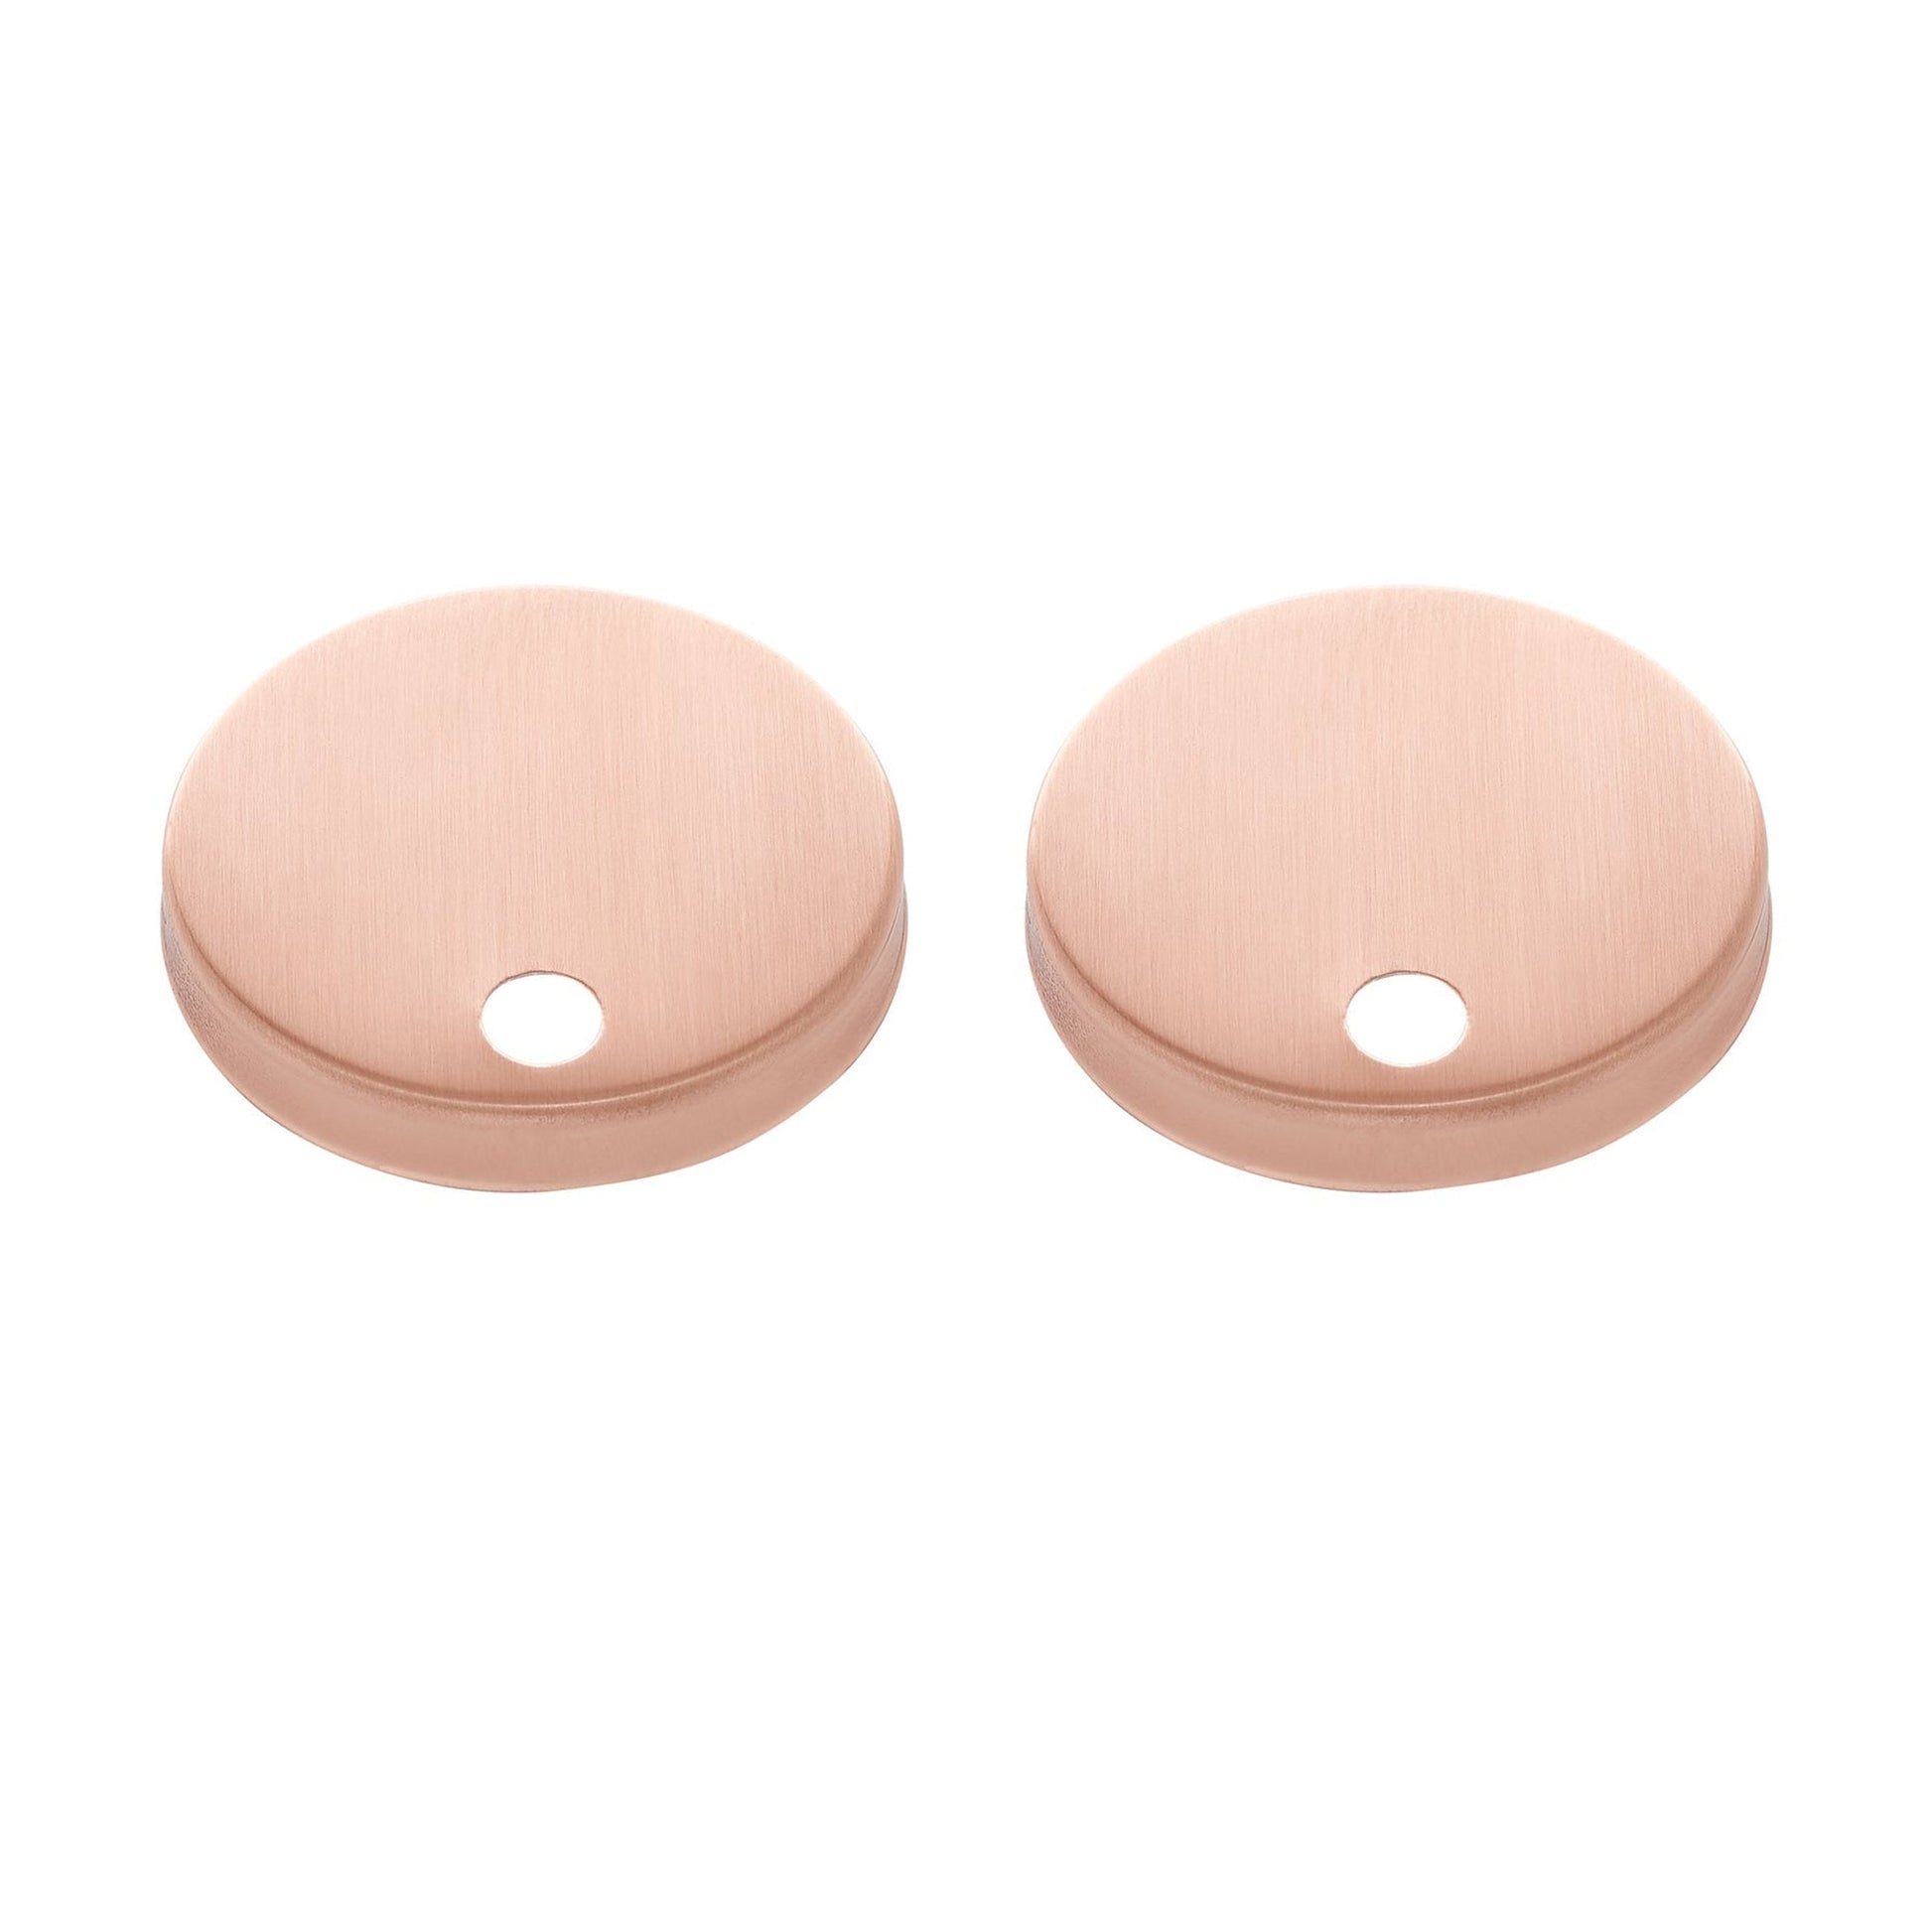 Swiss Madison Round Rose Gold Toilet Push Buttons With QQ Feet For SM-1T256, SM-1T205